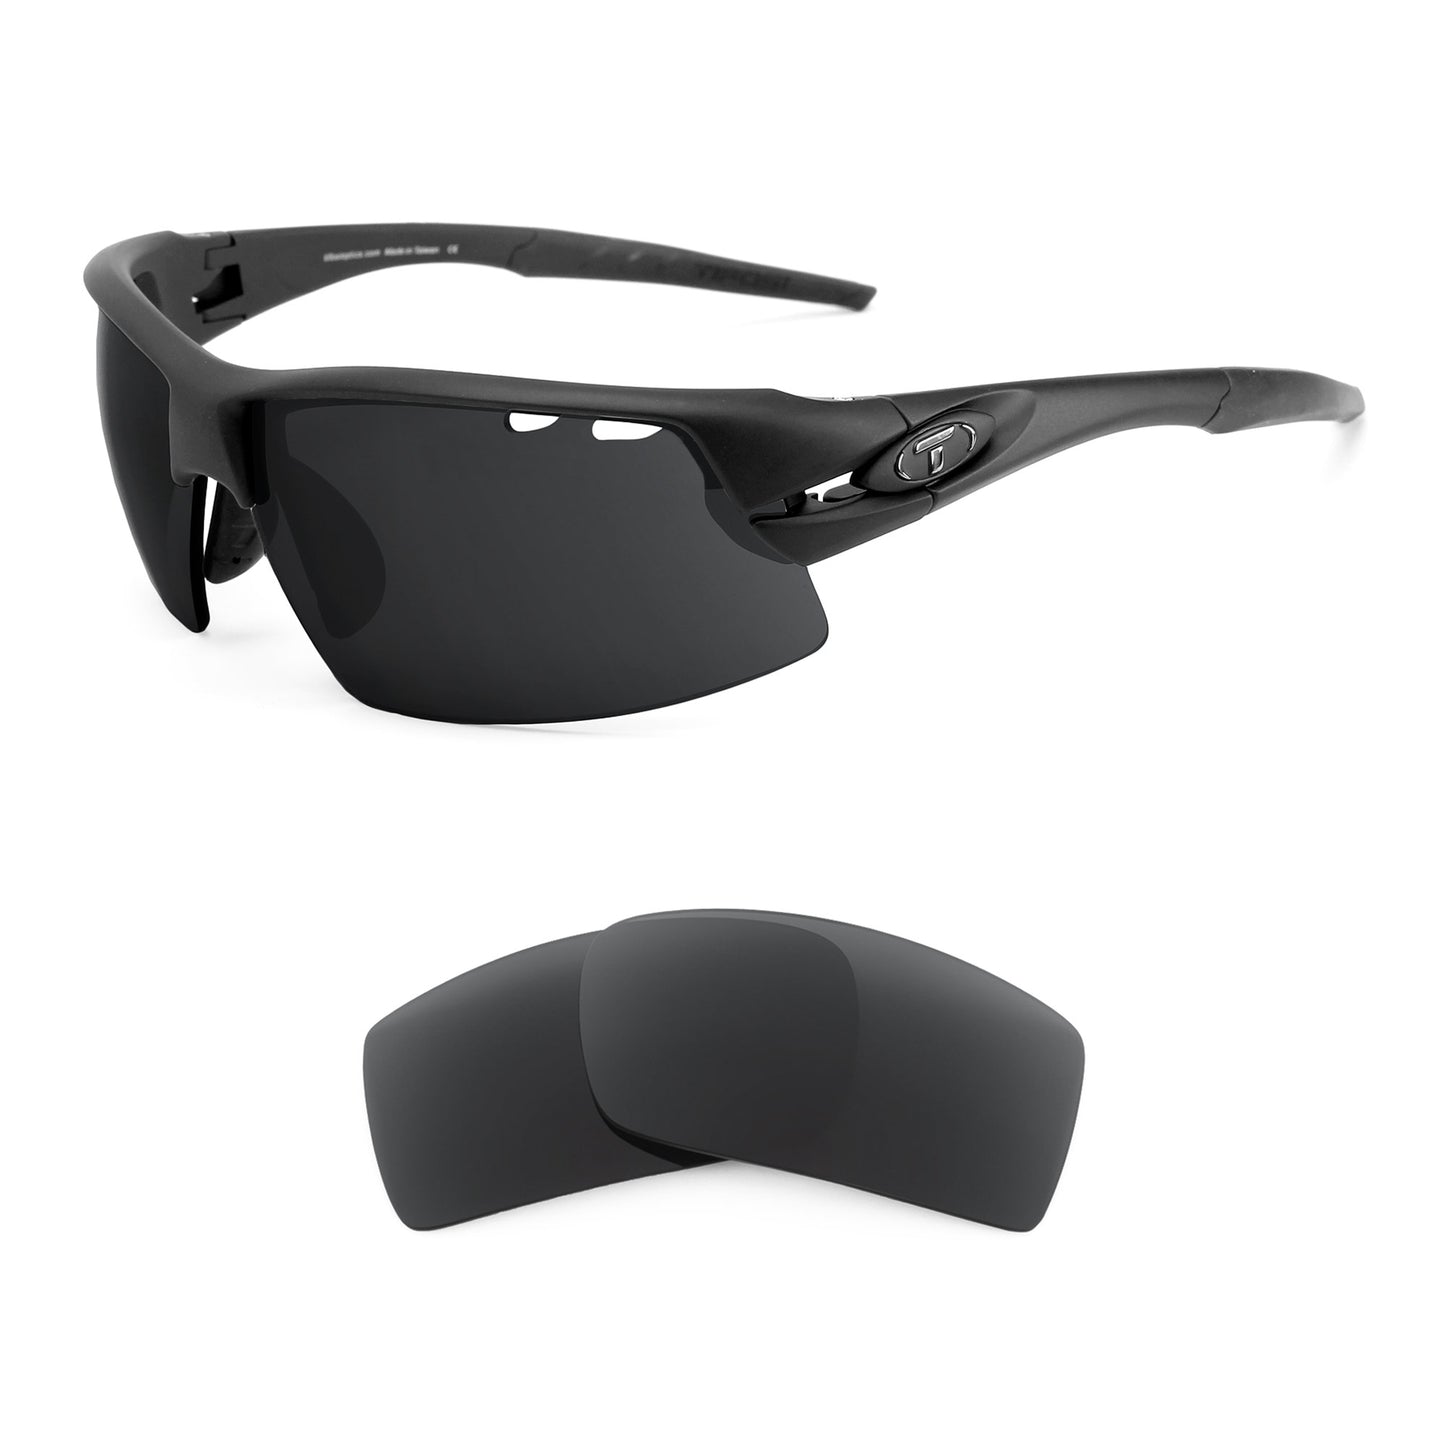 Tifosi Crit Vented sunglasses with replacement lenses